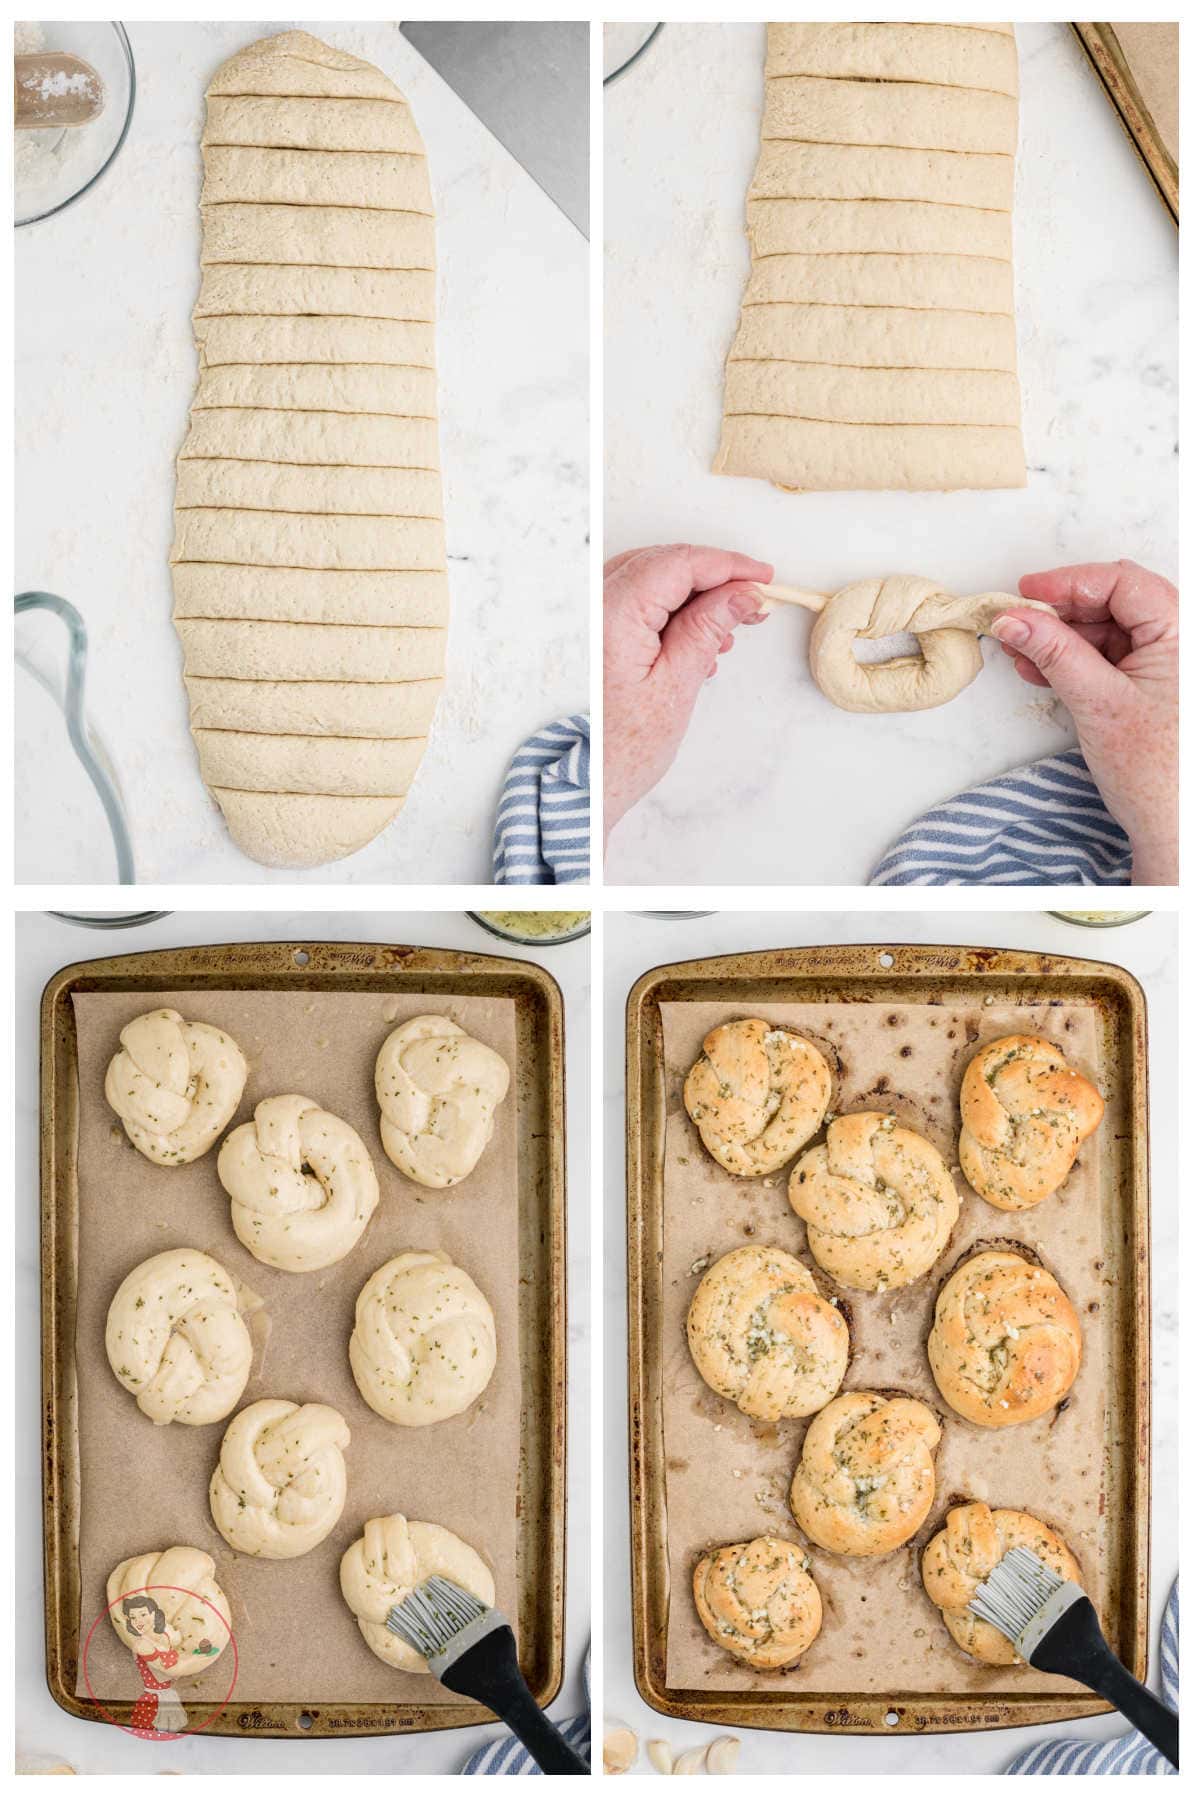 Step by step images showing how to shape the garlic knots.